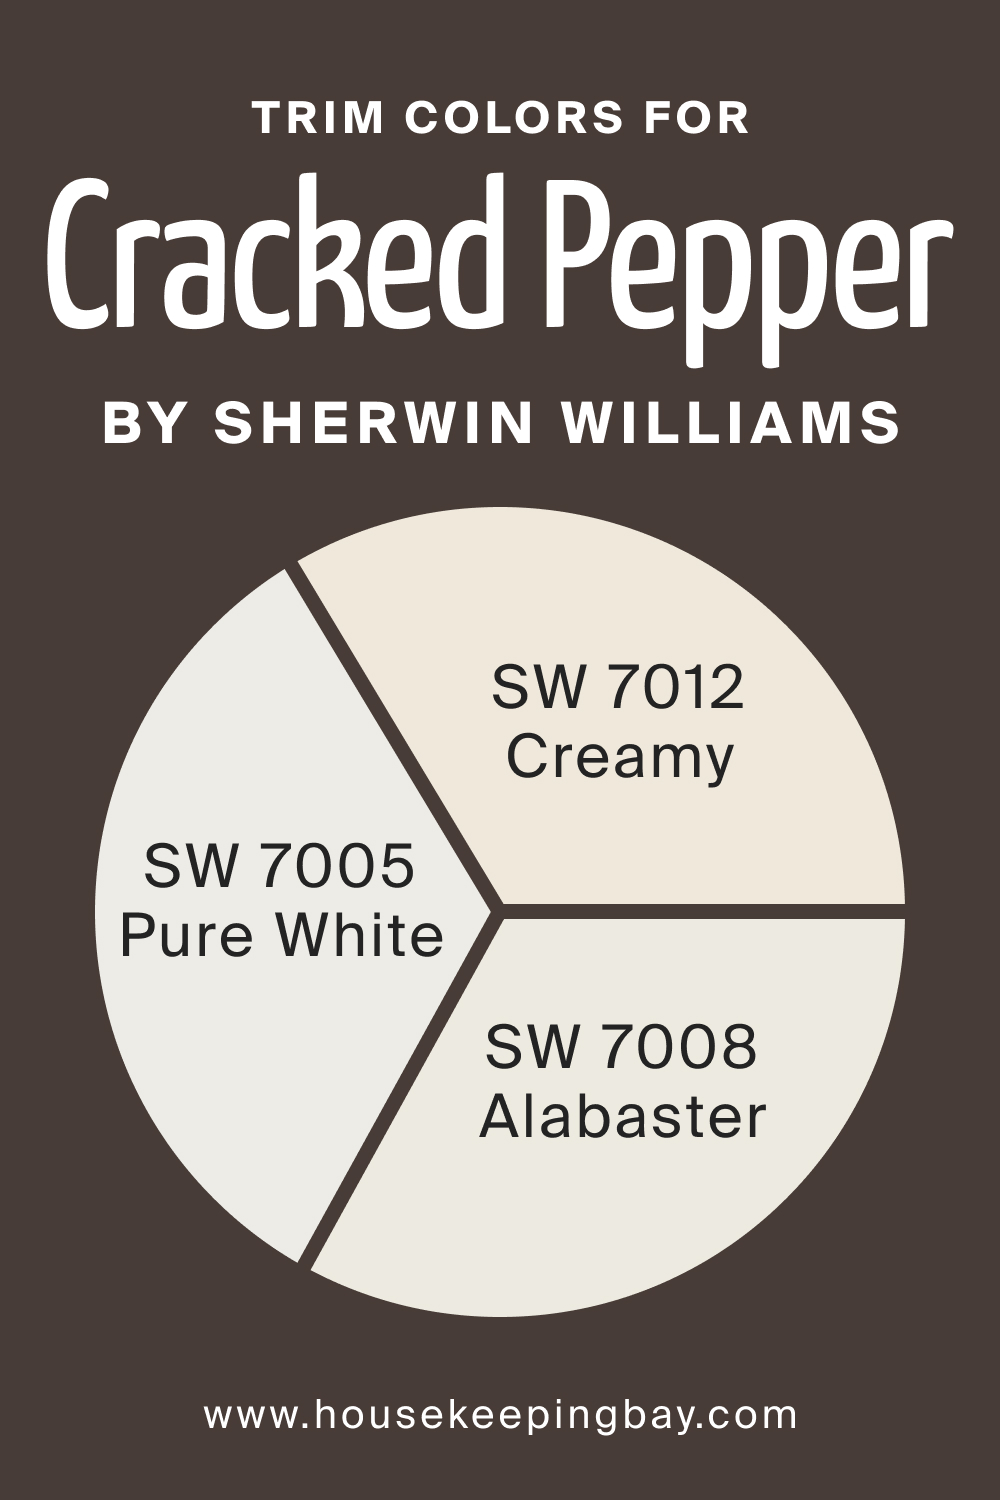 Trim Colors of SW 9580 Cracked Pepper by Sherwin Williams